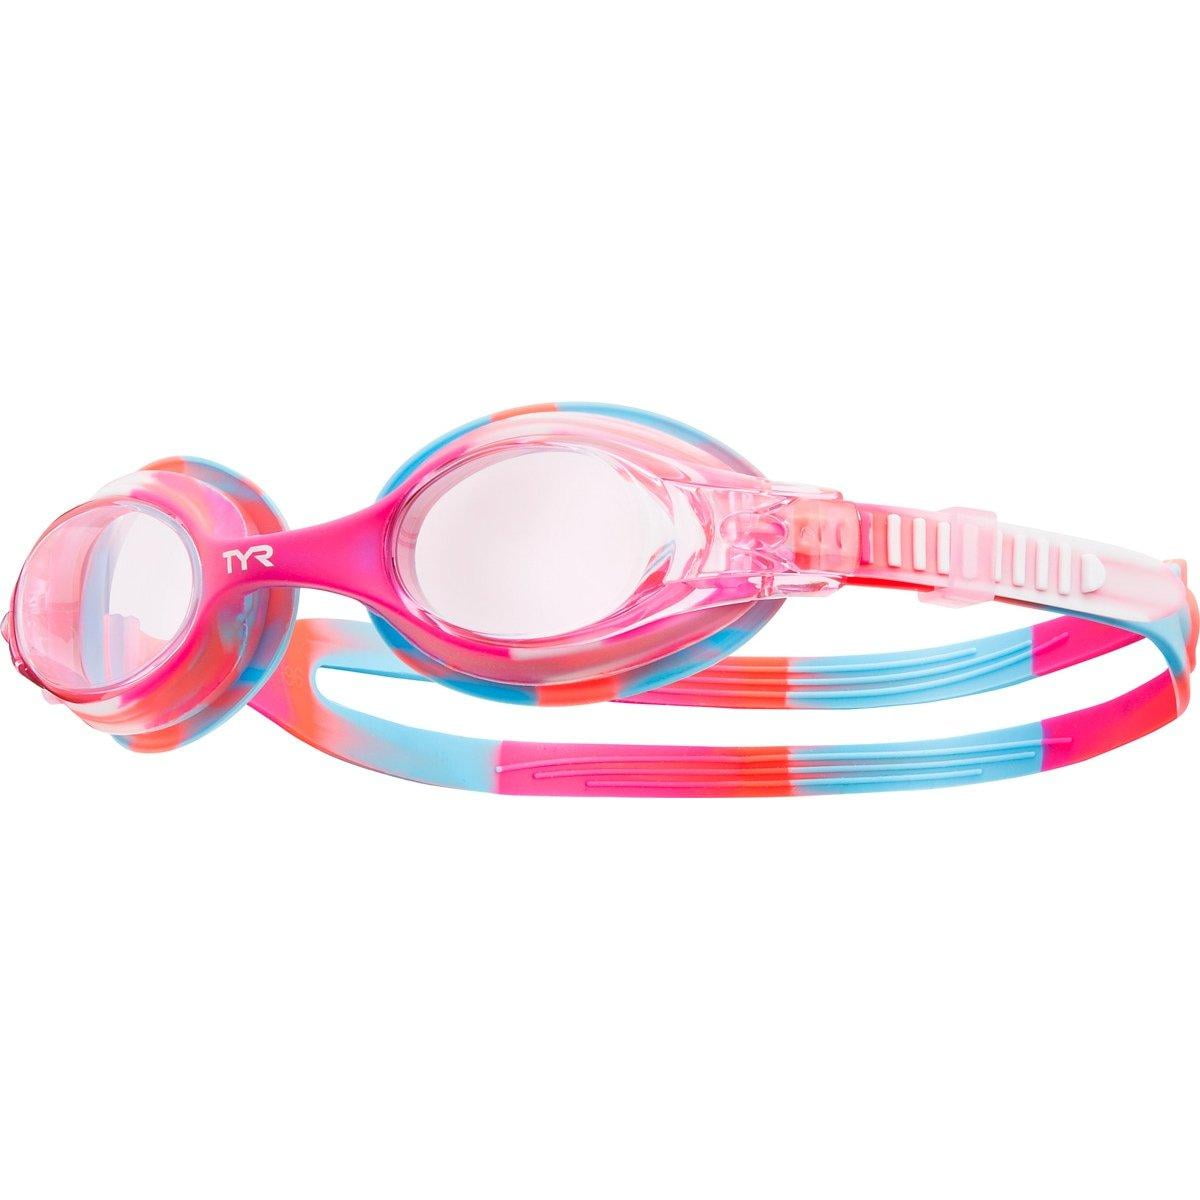 Details about   CHOICE OF COLOR ON TYR ACTIVE BIG SWIMPLE SWIMMING GOGGLES FOR ADULTS 